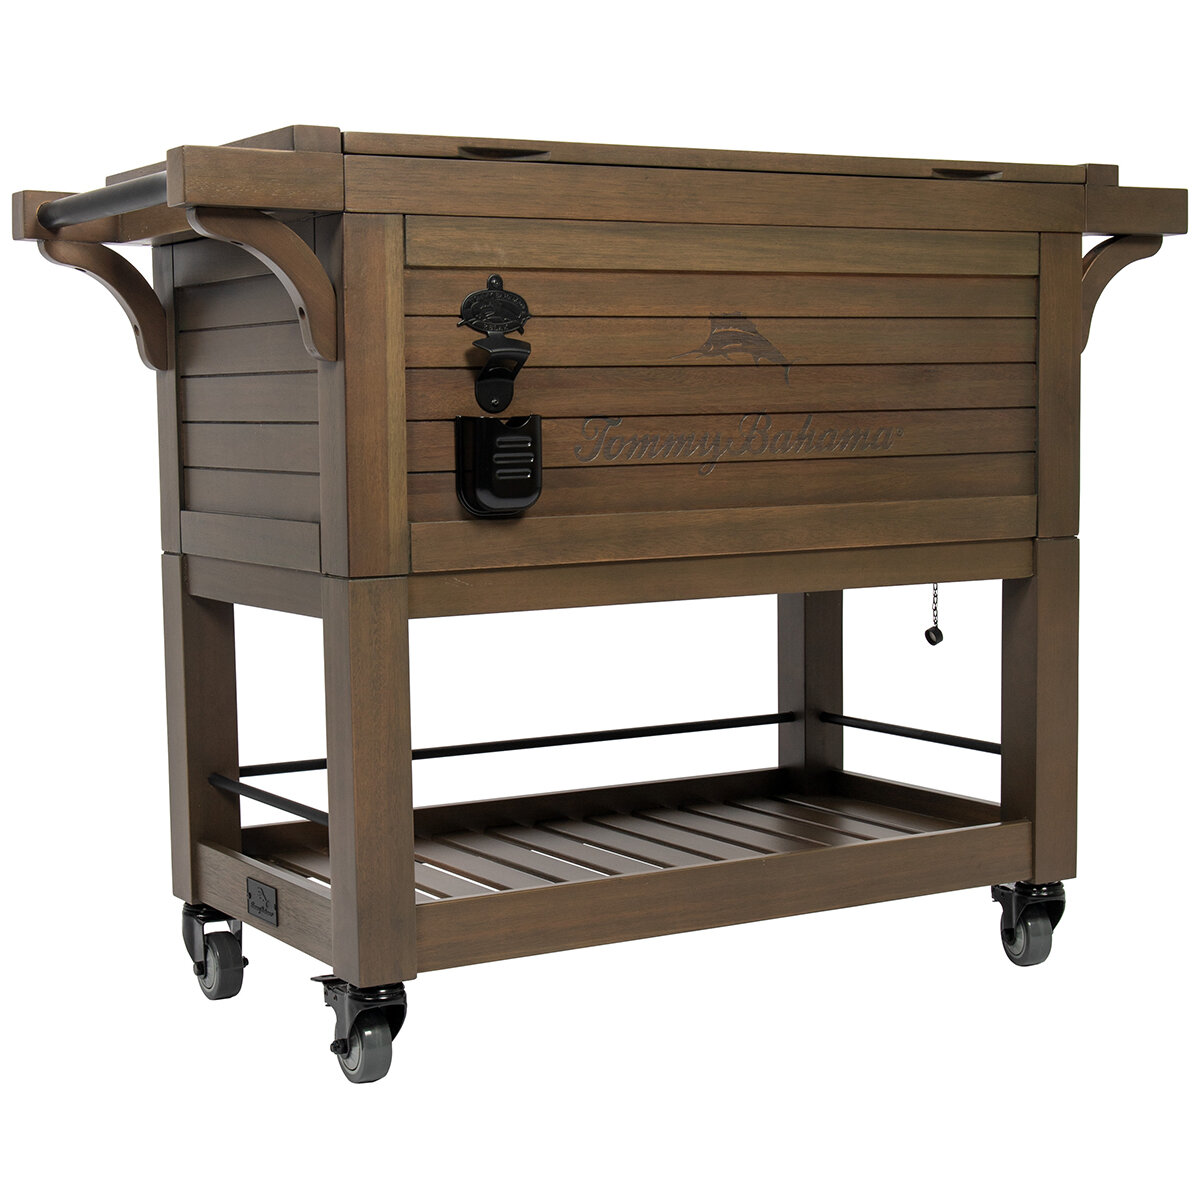 Tommy Bahama 100 Quart Wood Rolling Cooler Costco | lupon.gov.ph